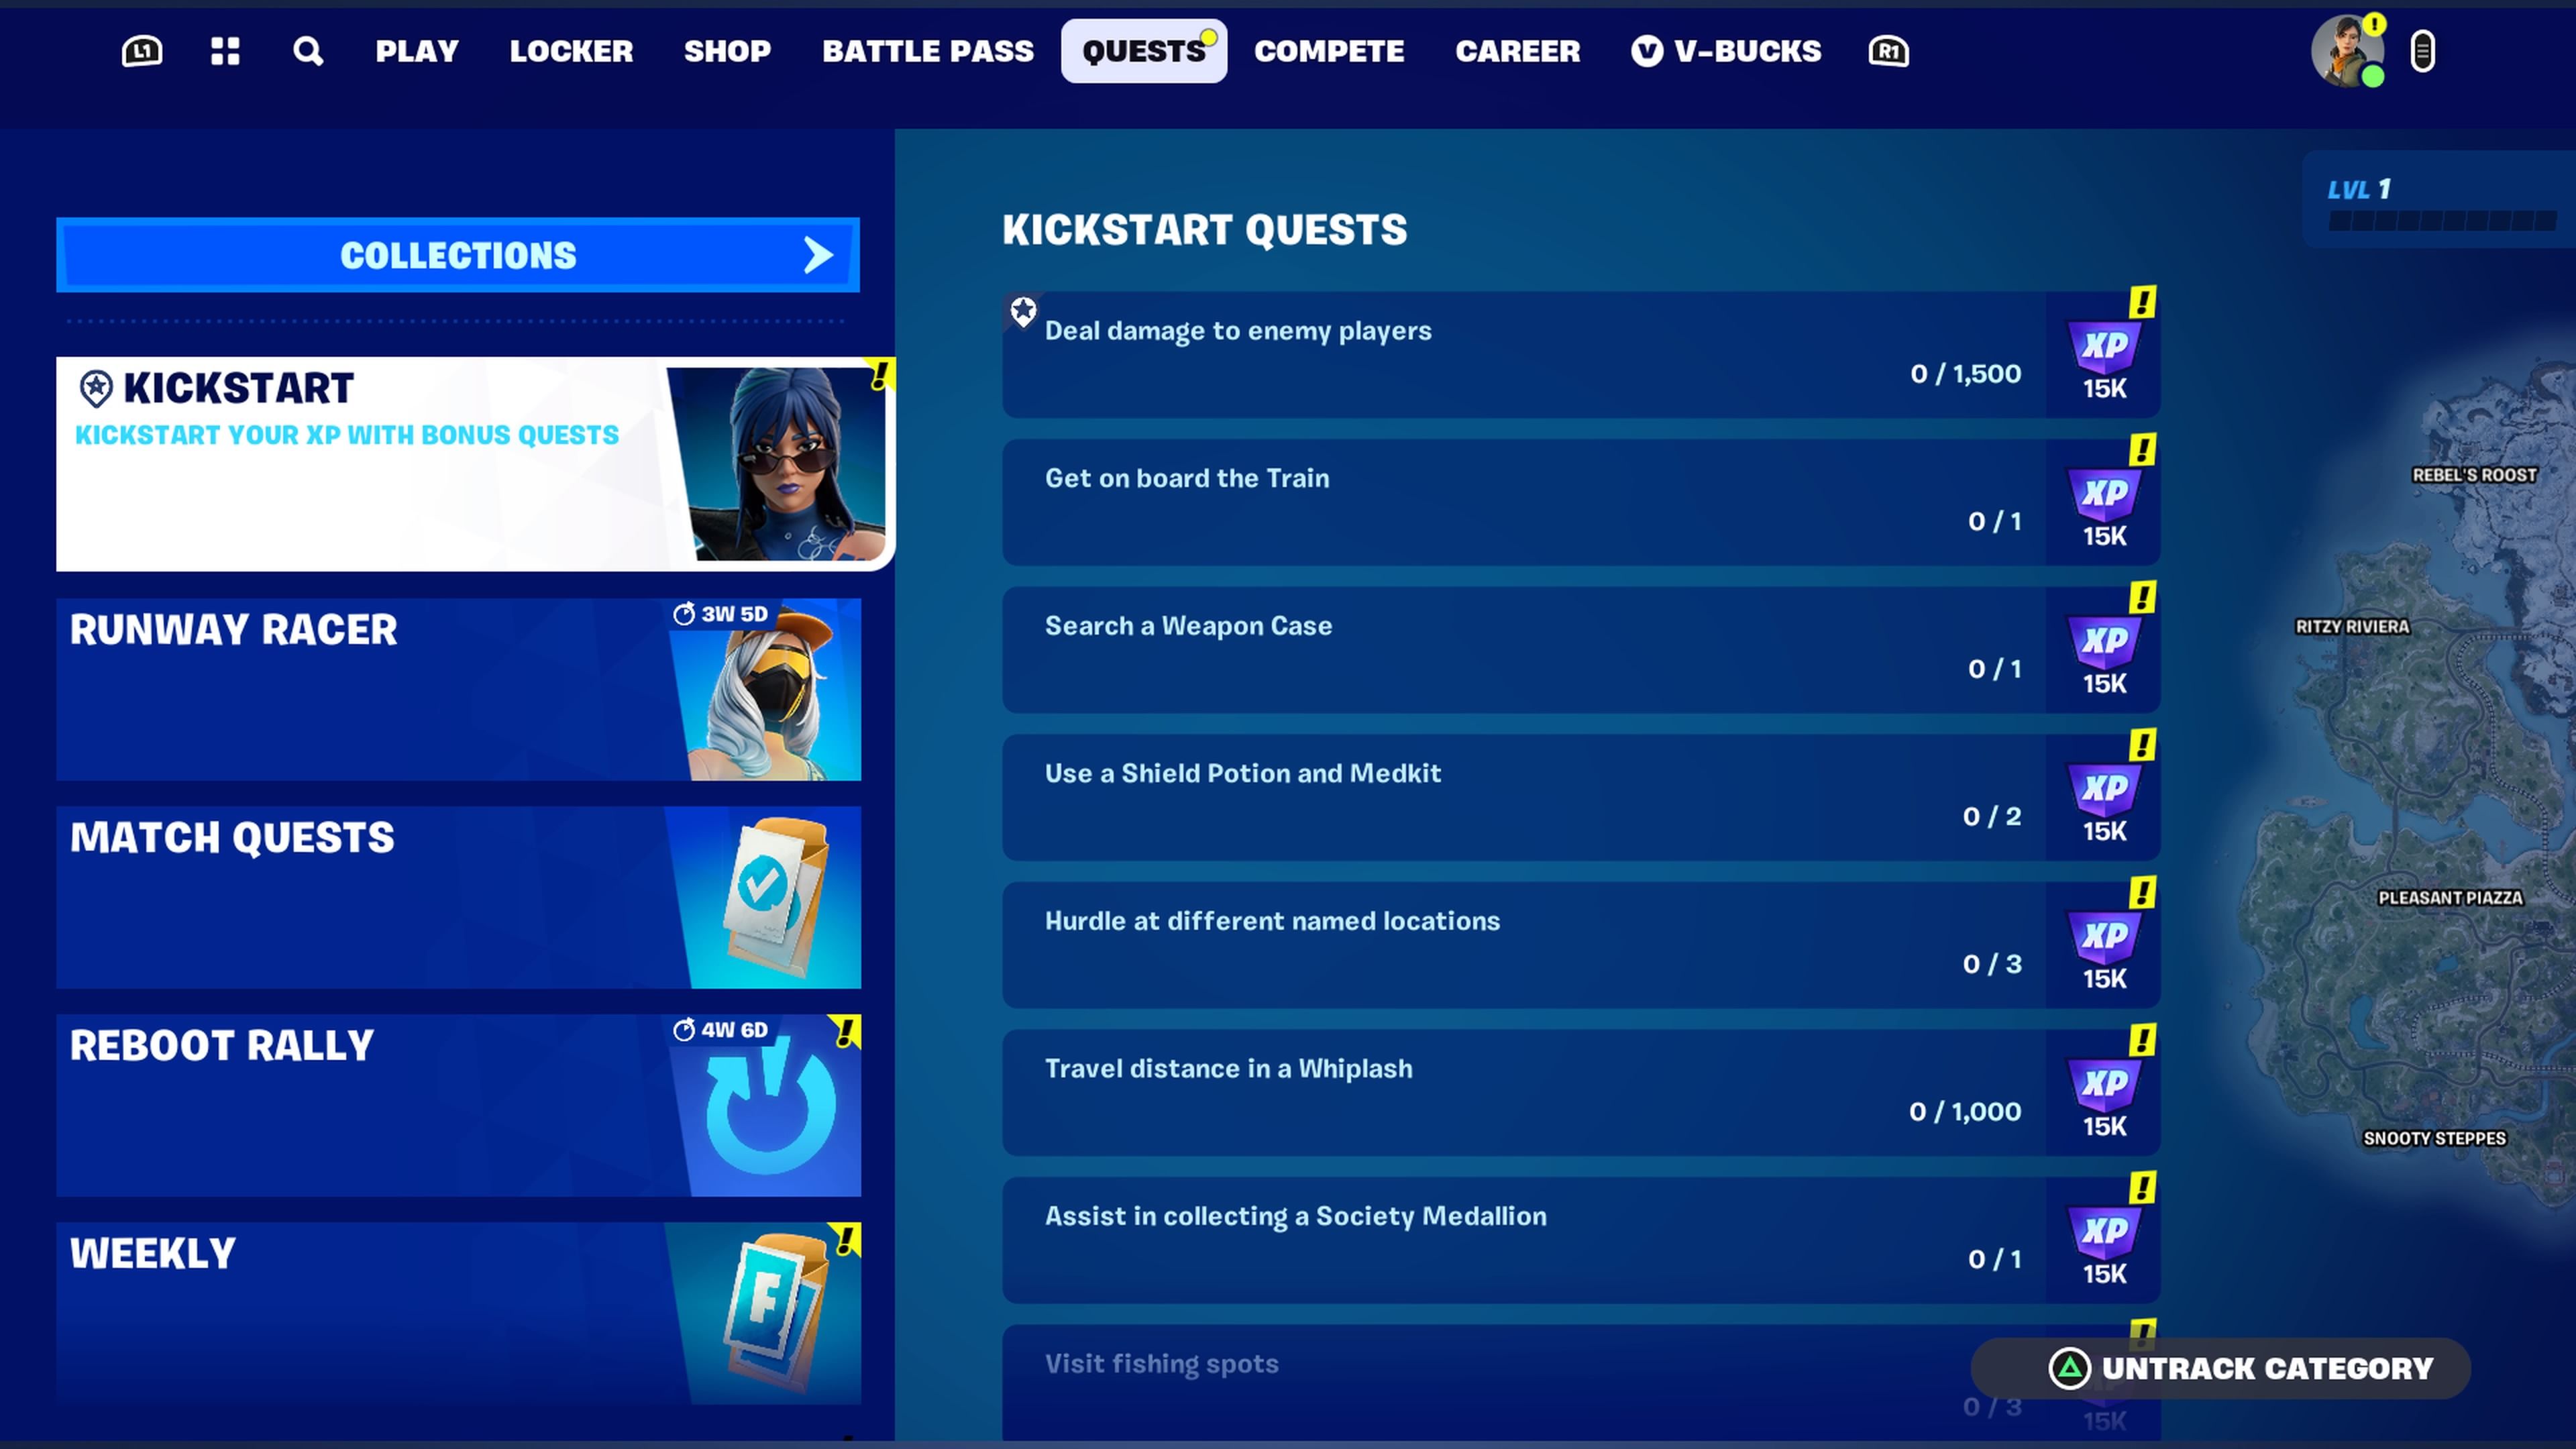 The Fortnite menu showing a list of all the Kickstart quests.